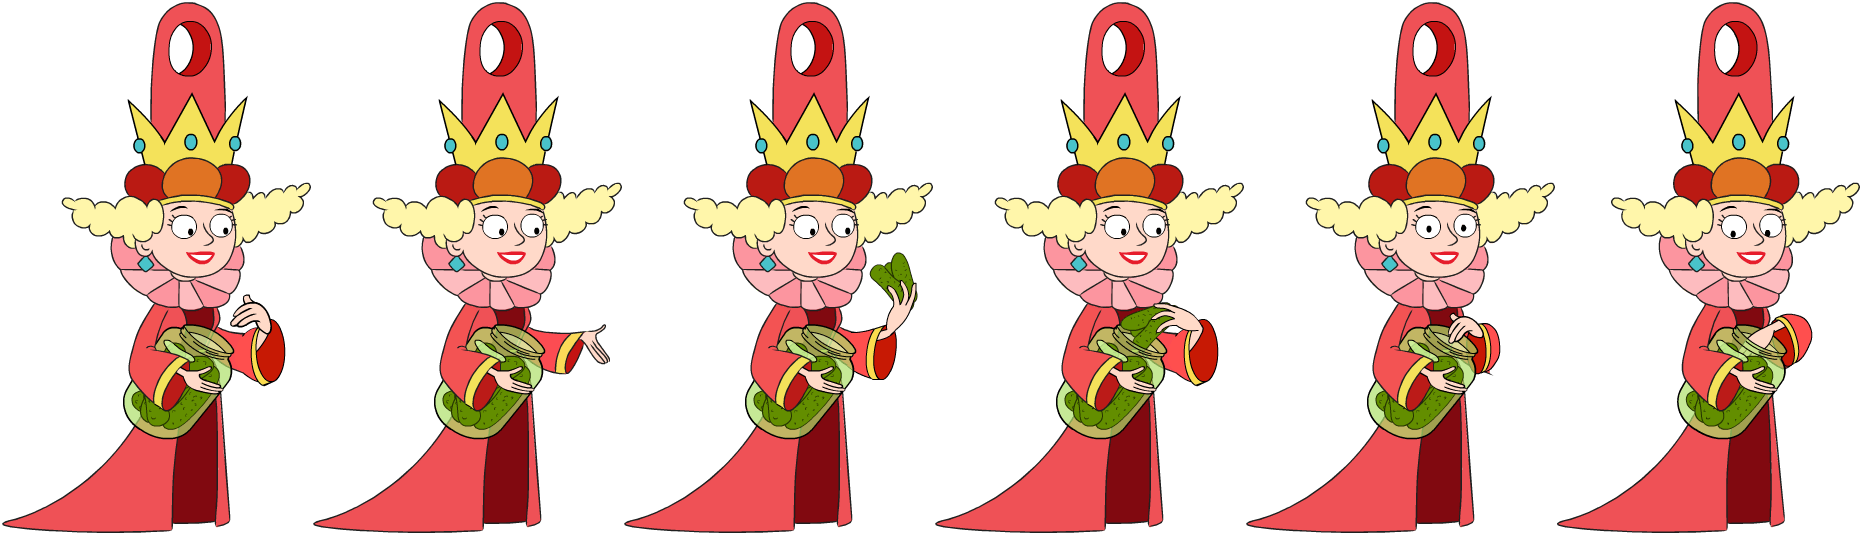 The 7D Dwarf Track Builder - Queen Delightful With Pickle